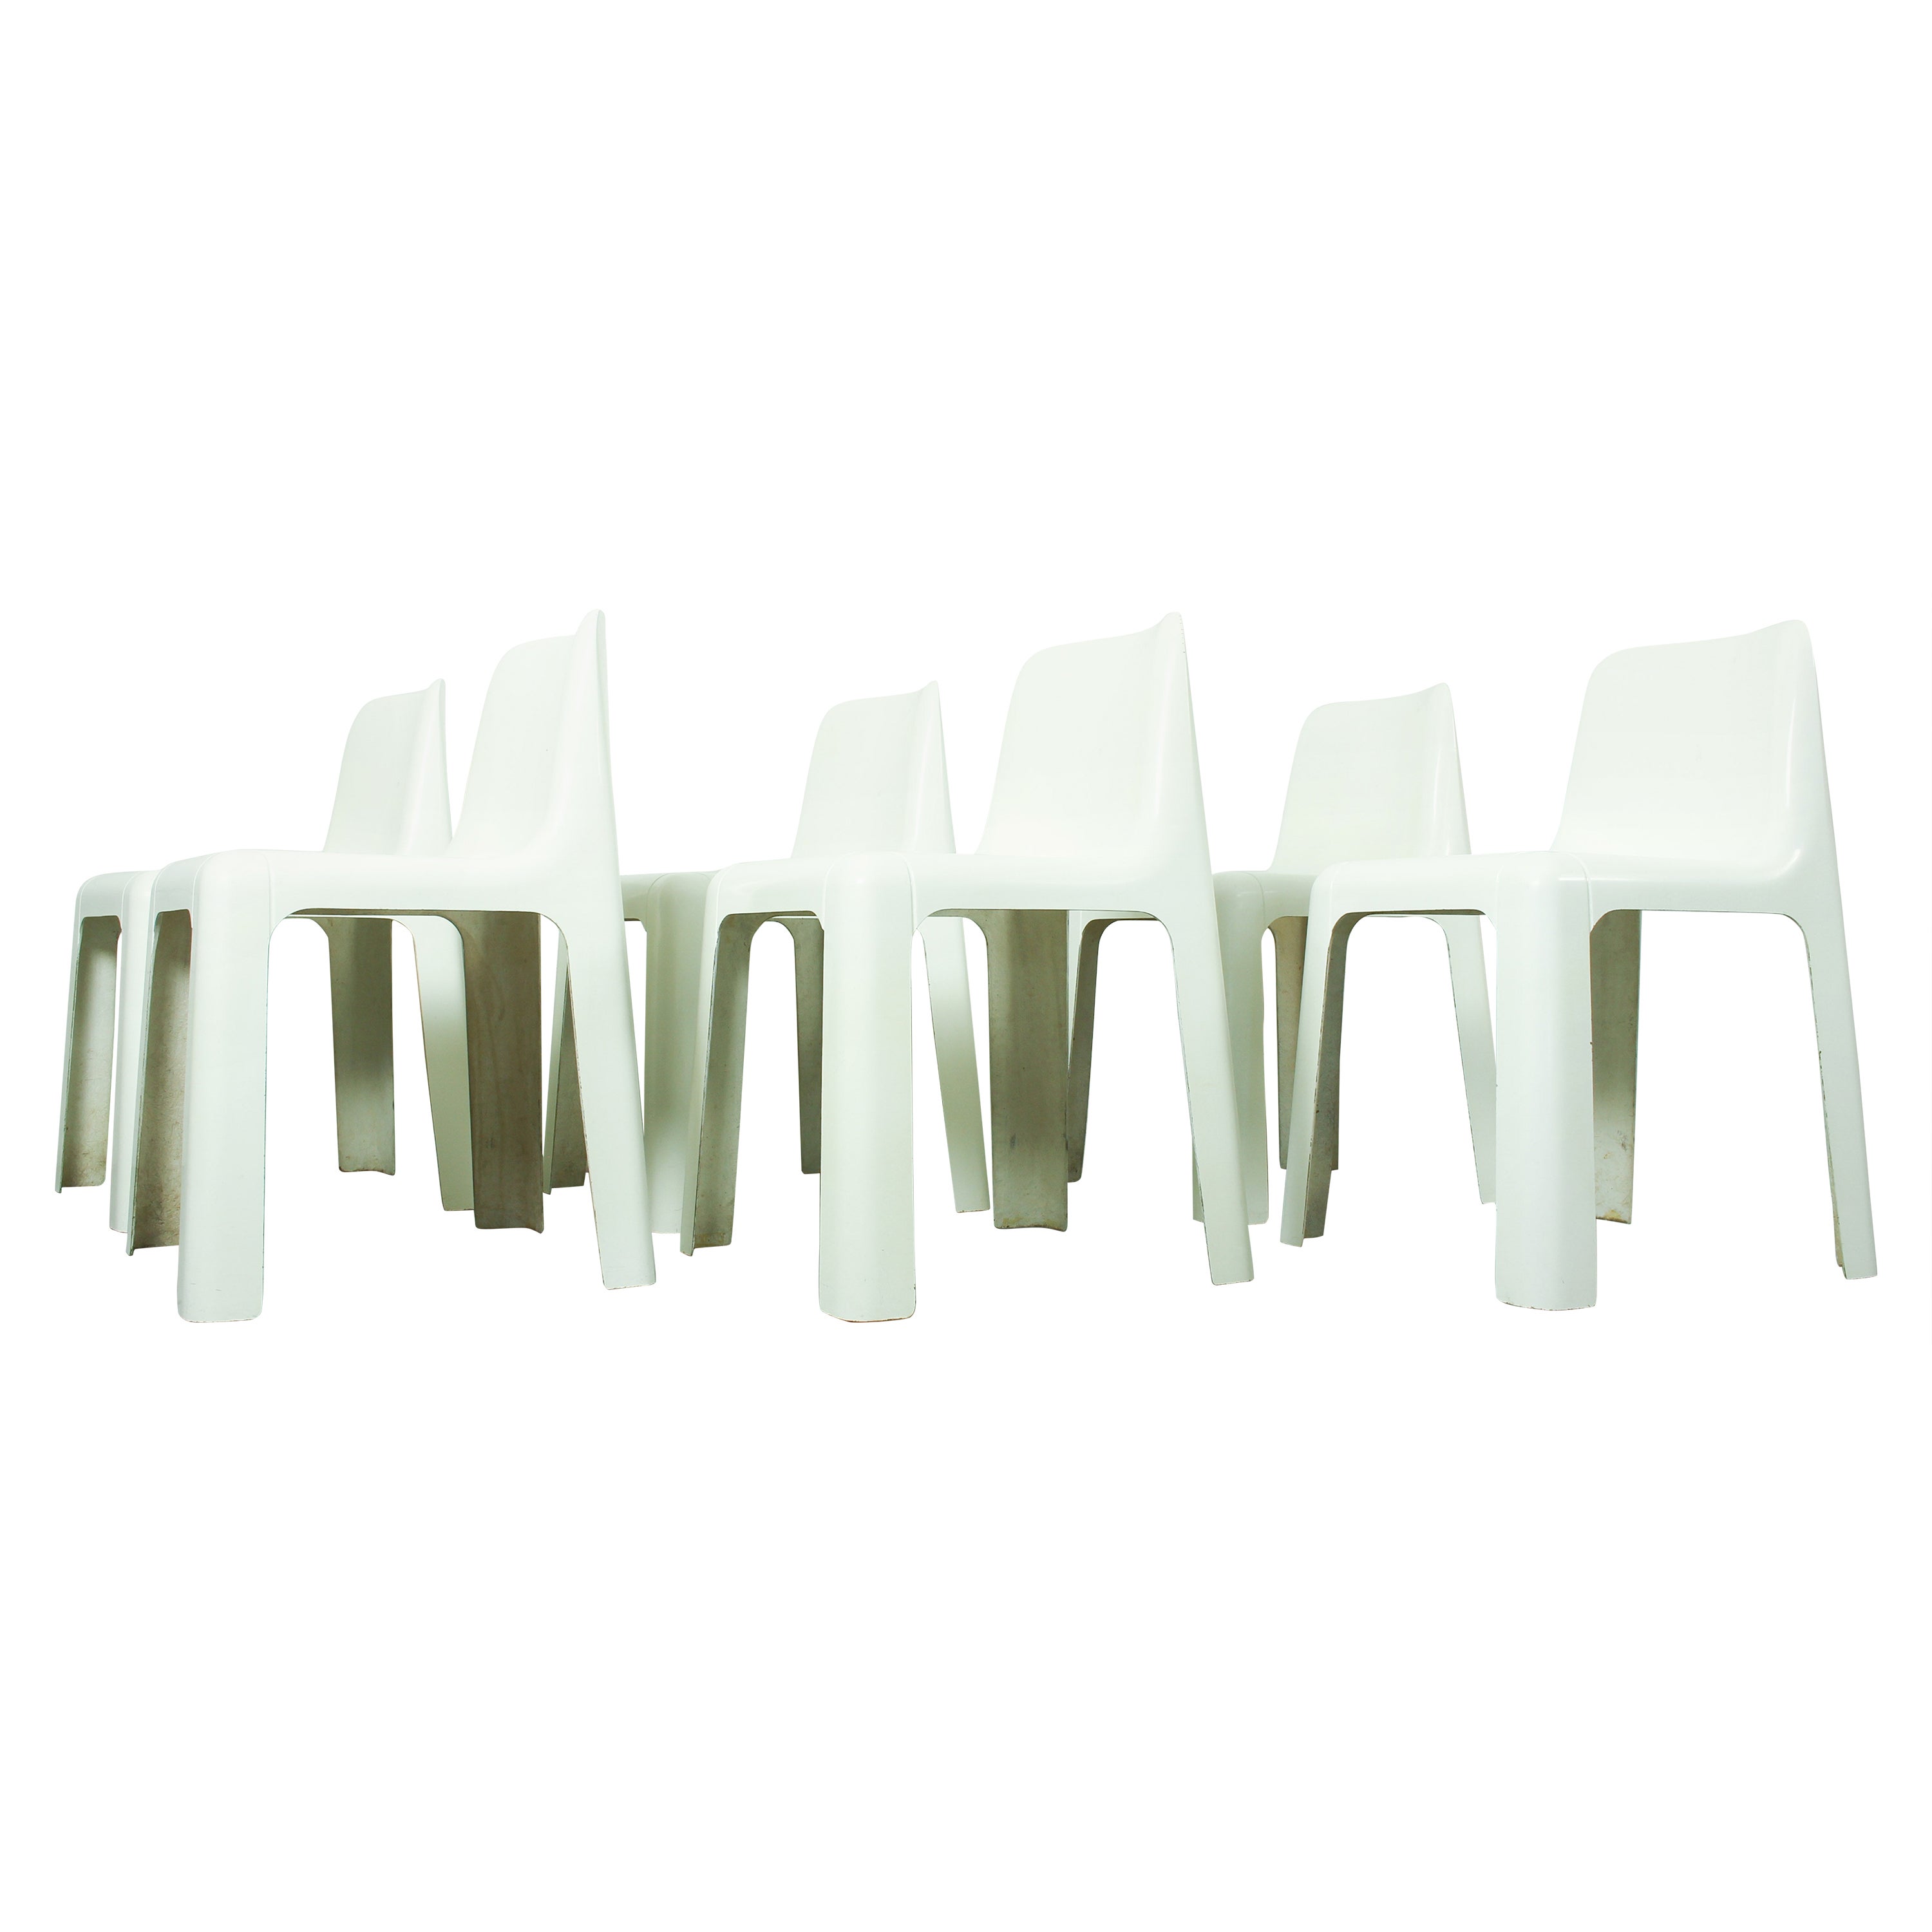 6 OZOO 700 Fiberglass Dining Chairs by Marc Berthier for Roche Bobois, 1970s For Sale